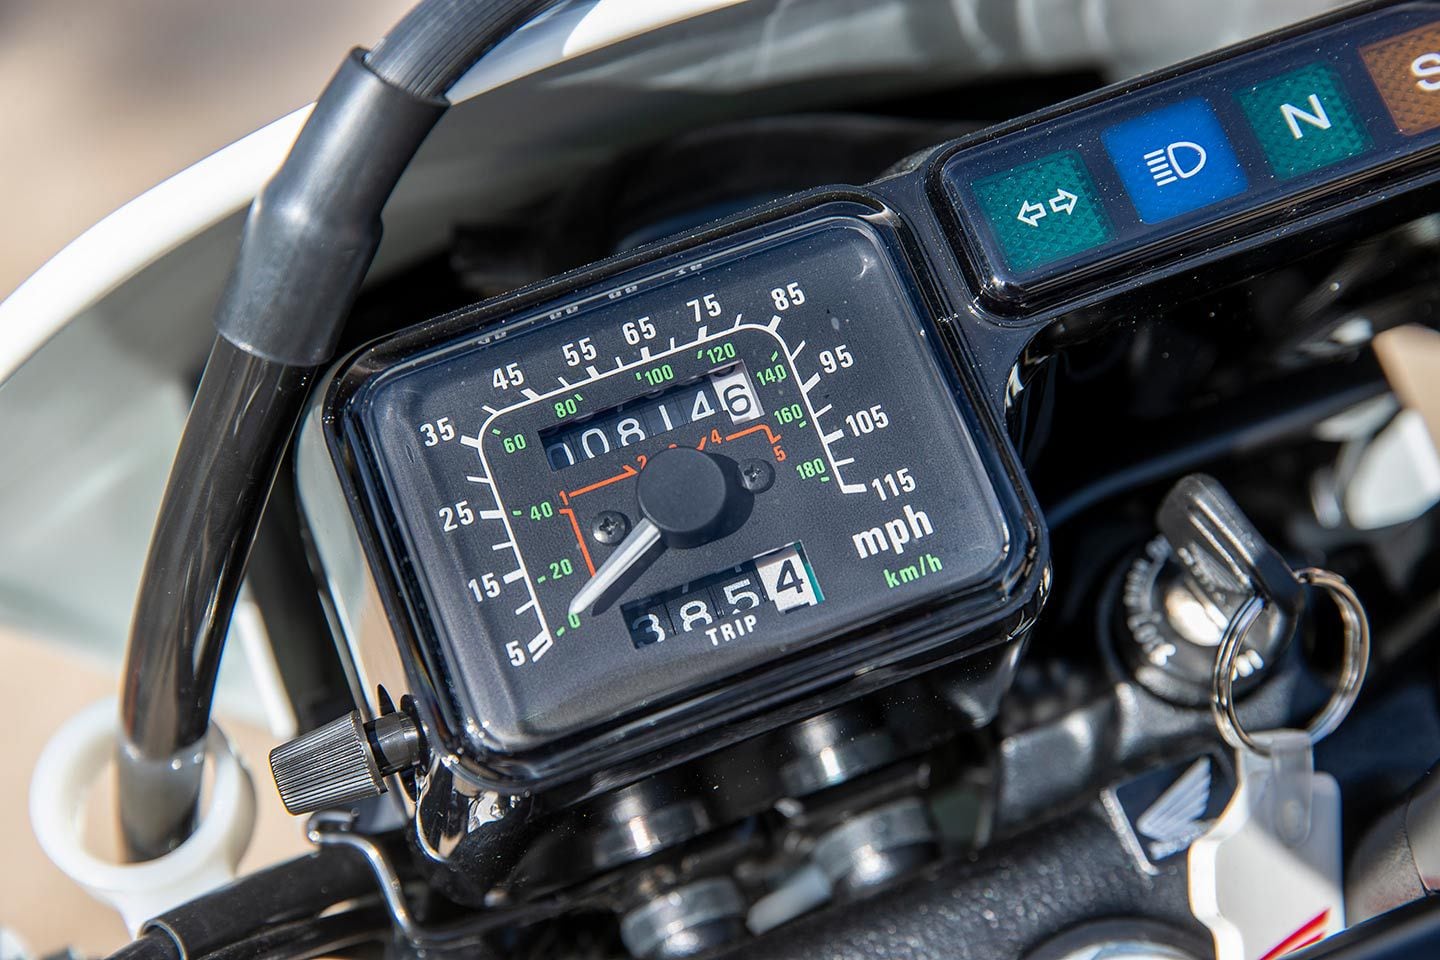 Sometimes less is more. The XR650L’s dash displays an analog speedometer, odometer, tripmeter, and a few indicator lights. (2023 model shown.)